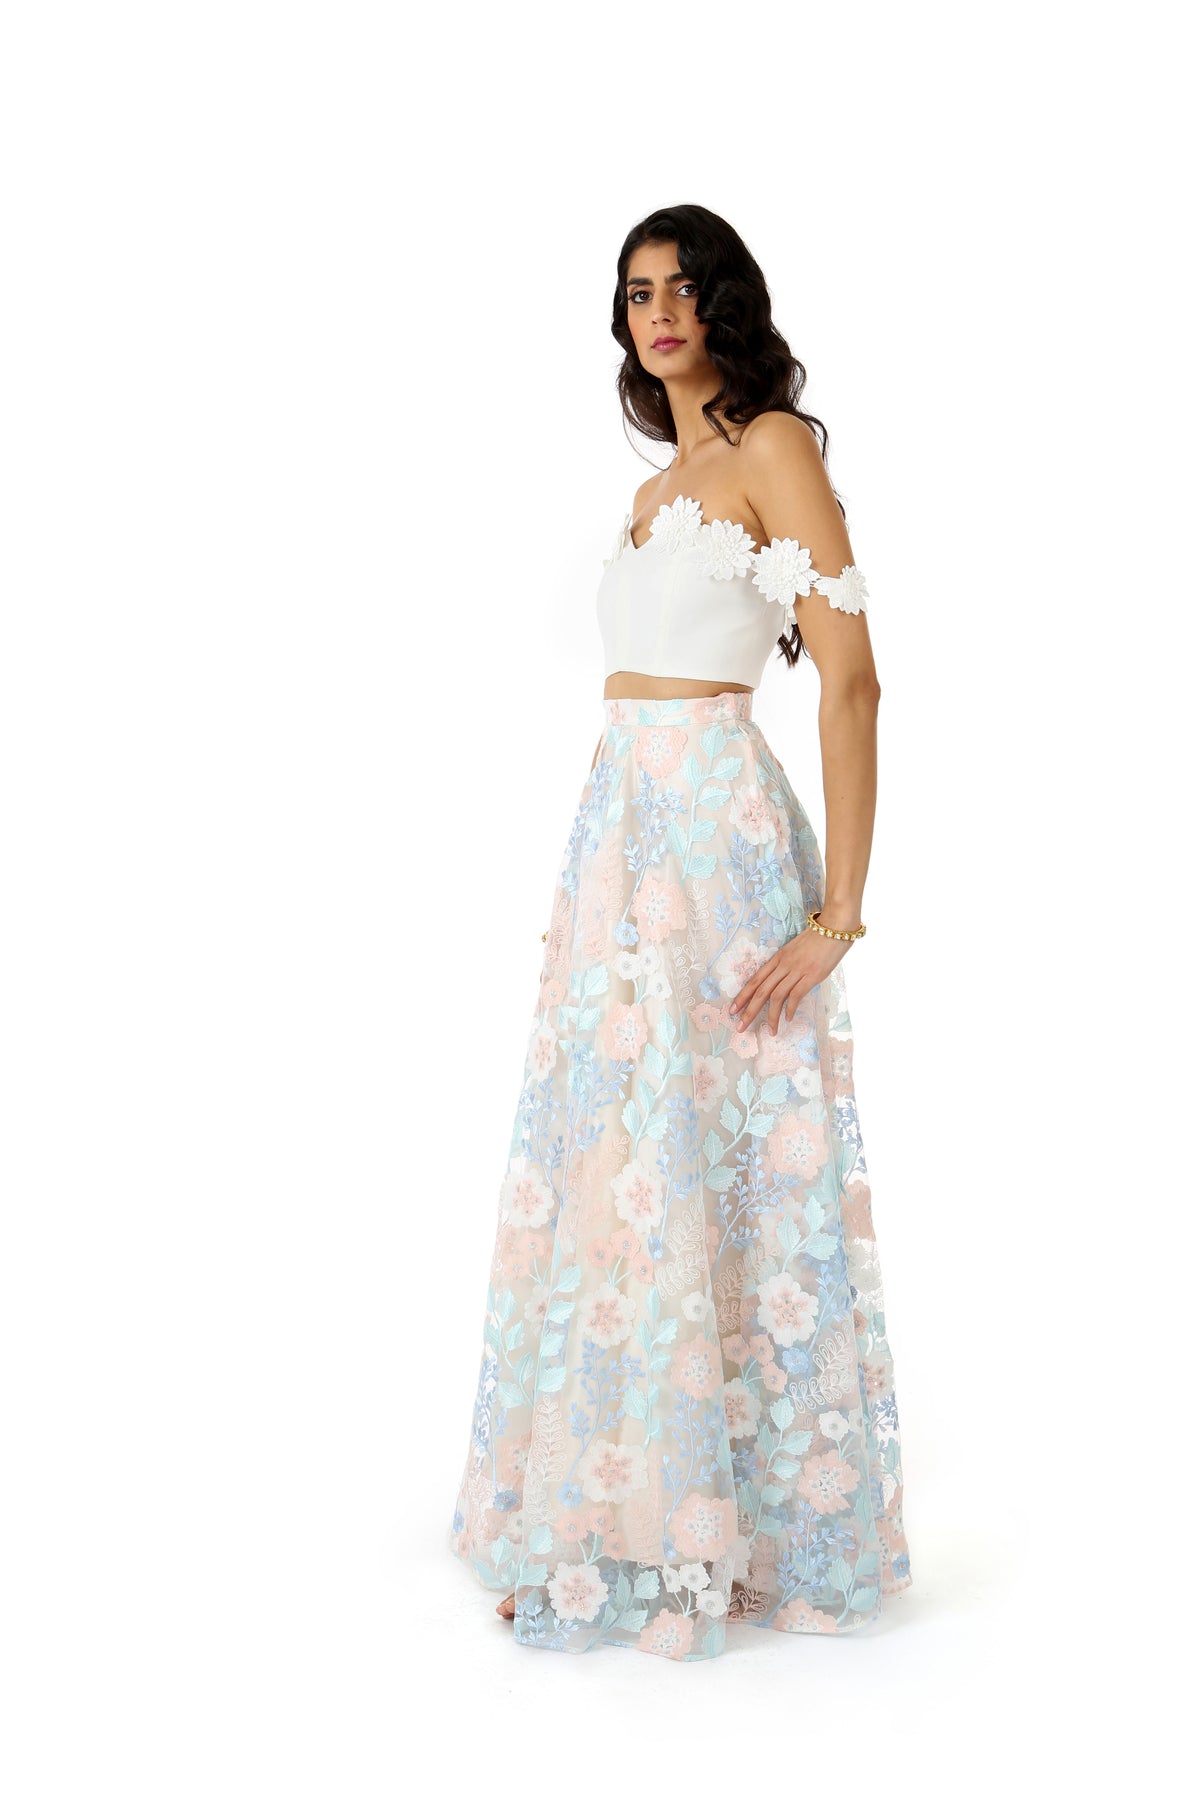 White Lehenga Top with Off-the-Shoulder White Floral Trim - Side View - Harleen Kaur - Modern Indian Womenswear